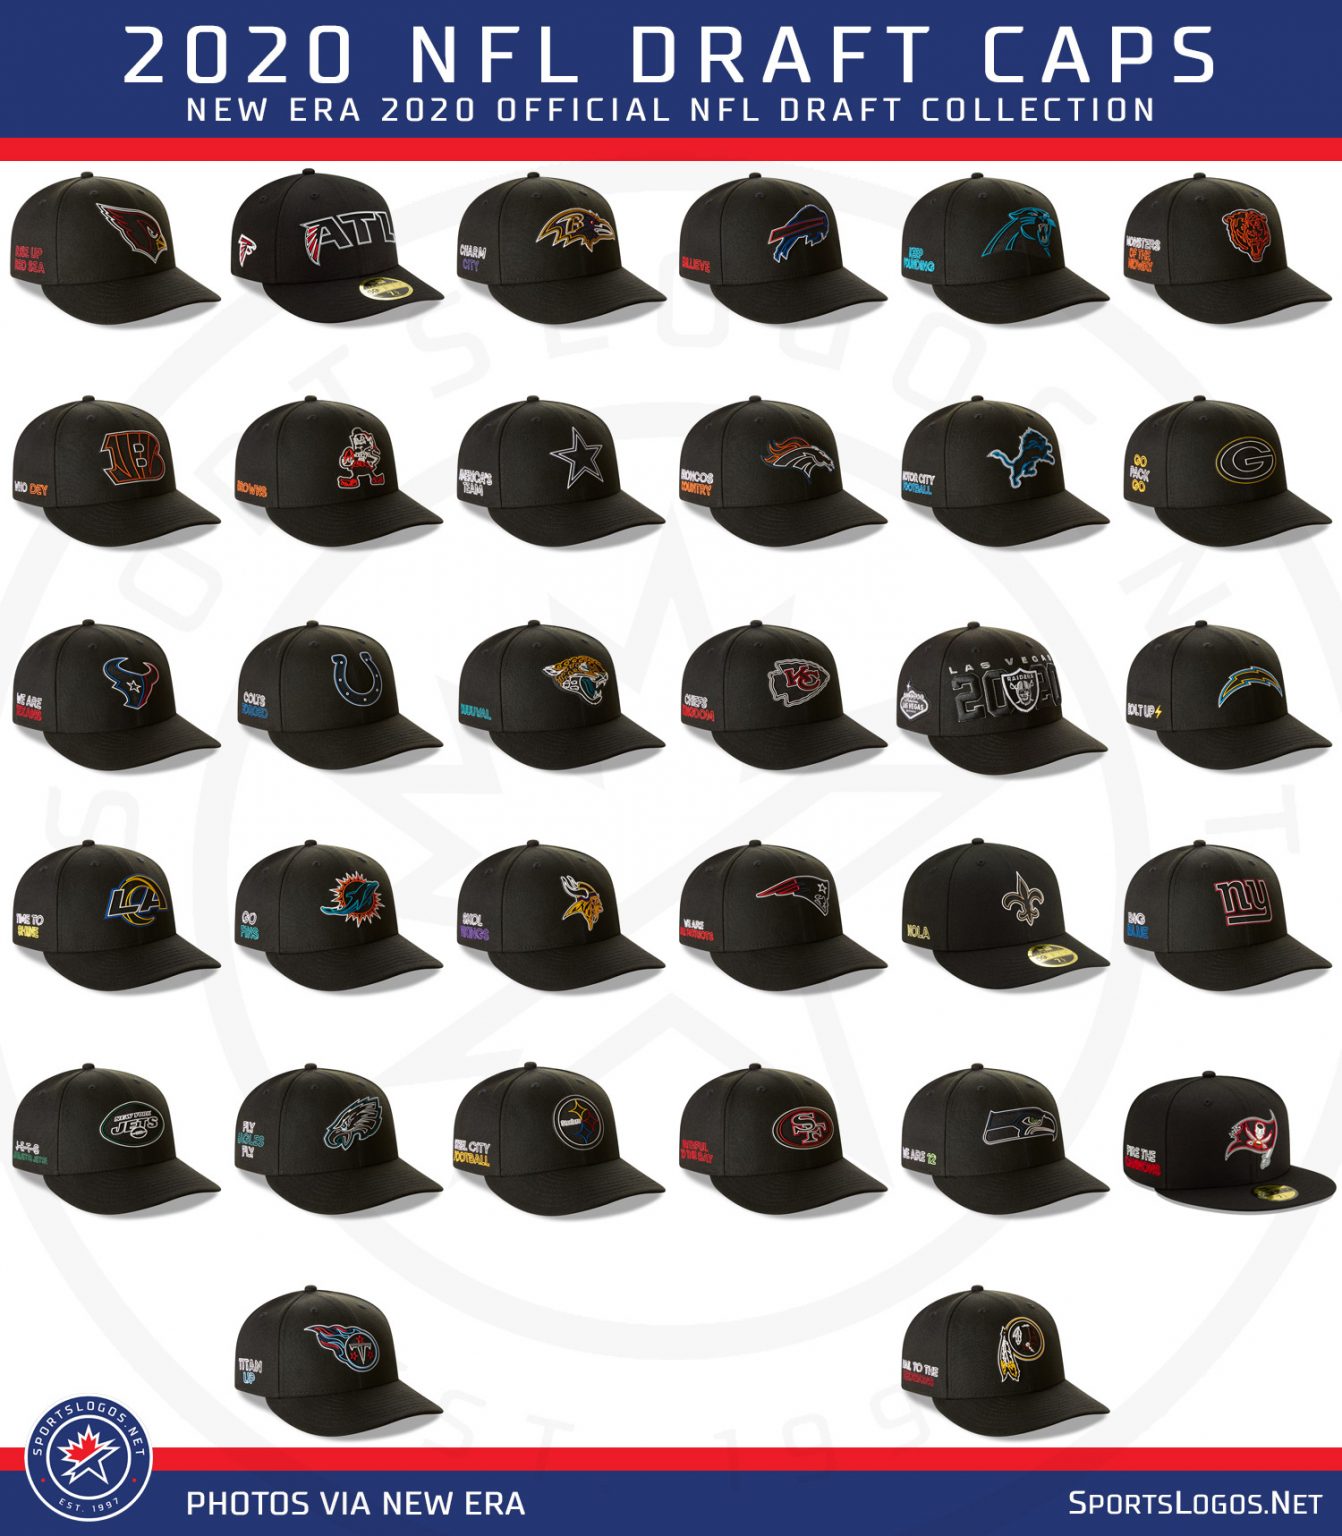 The 2020 NFL Draft Cap Collection from New Era News